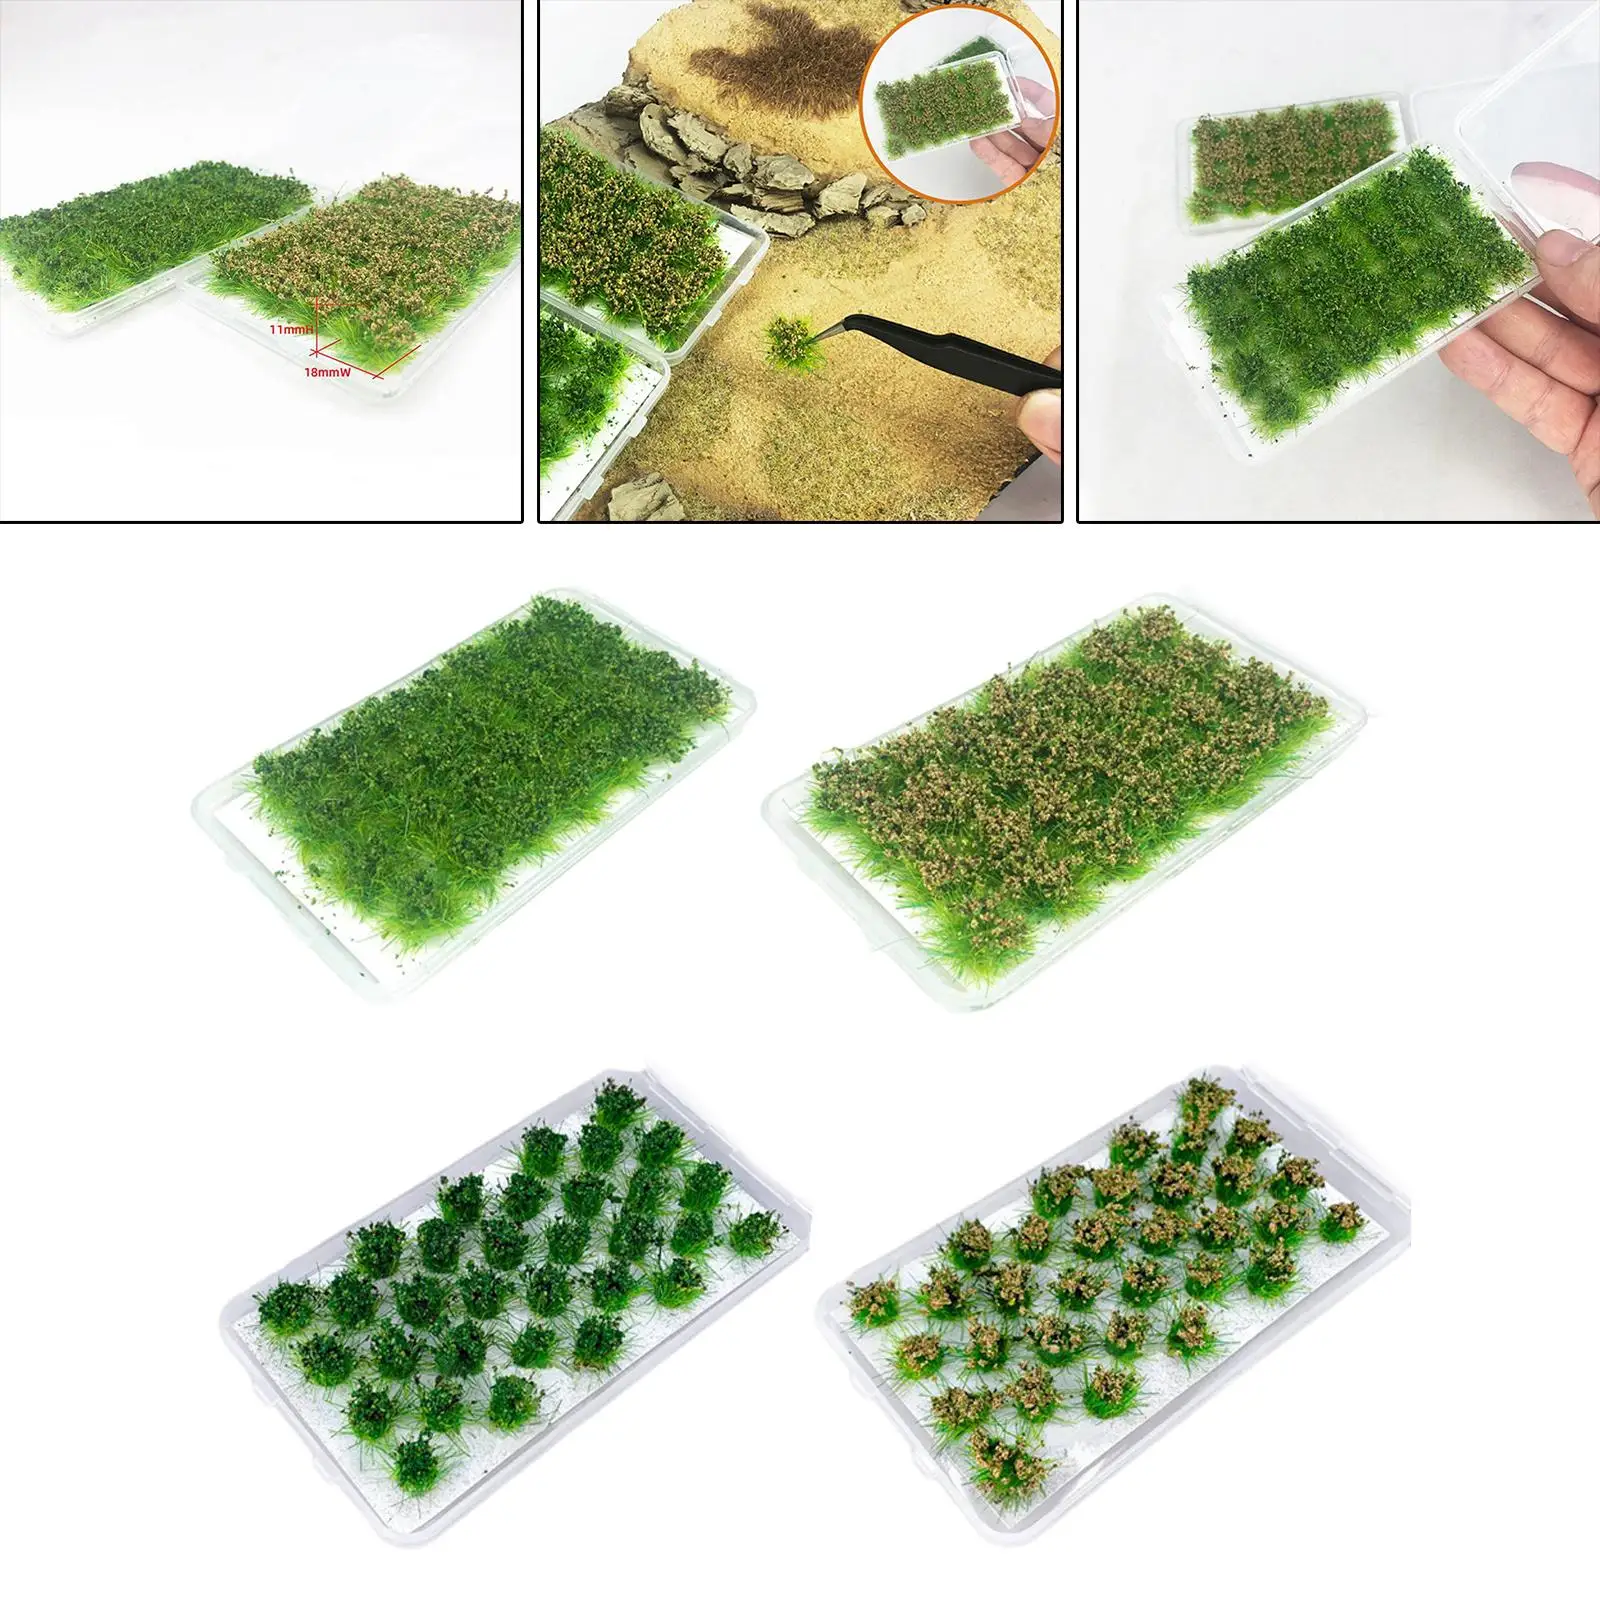 Cluster Grass Tufts Static Scenery Model Miniature Dioramas Railroad Scenery Sand Gaming Terrain Modeling Miniature Grass Tufts